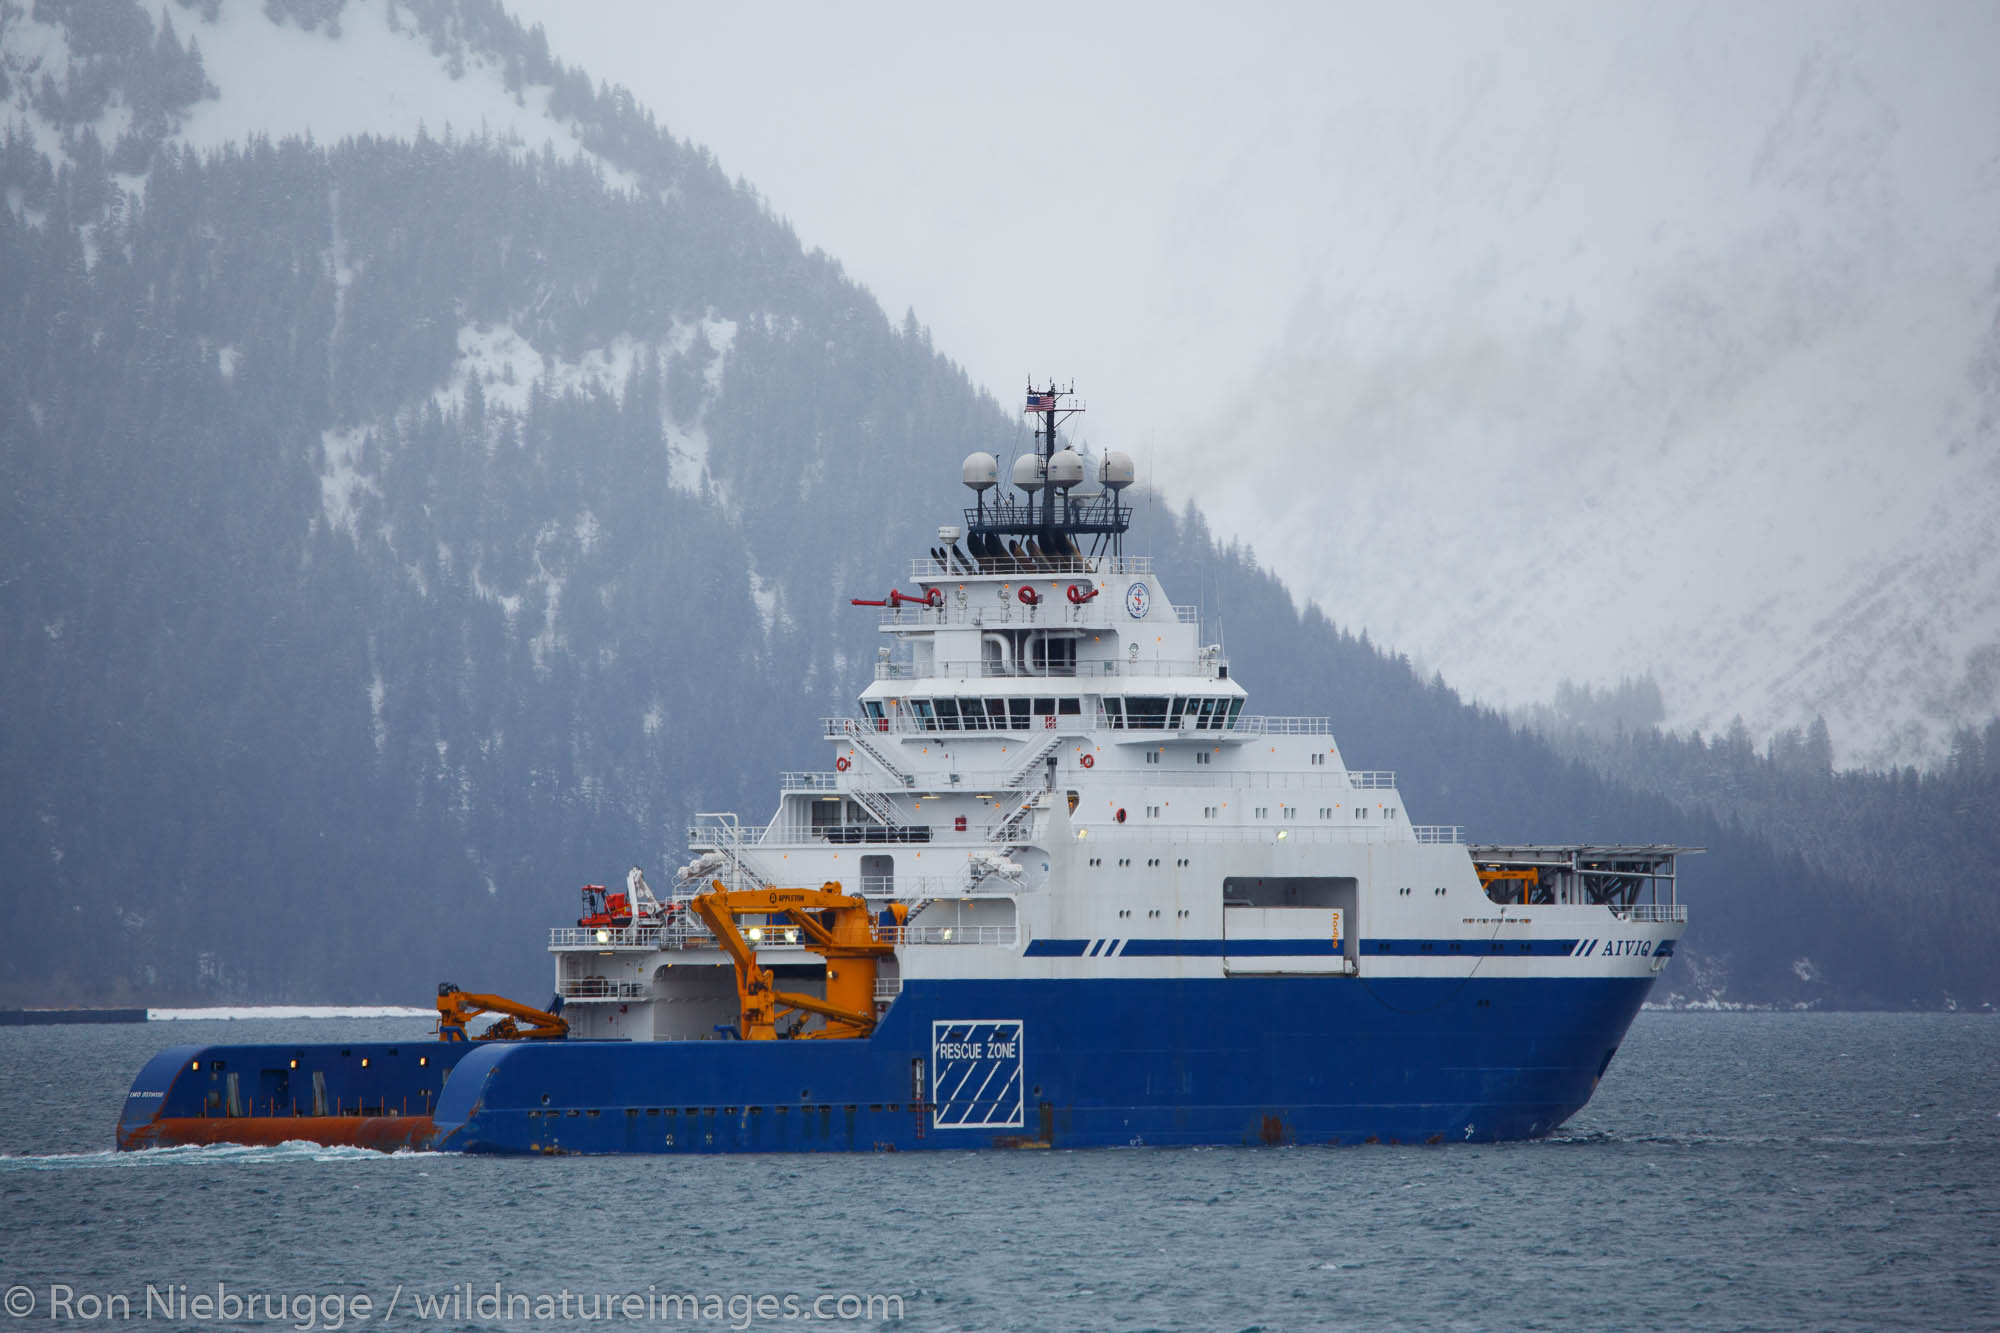 Alviq is an American icebreaking anchor handling tug supply vessel (AHTS) owned by Edison Chouest Offshore (ECO).  Photo taken...